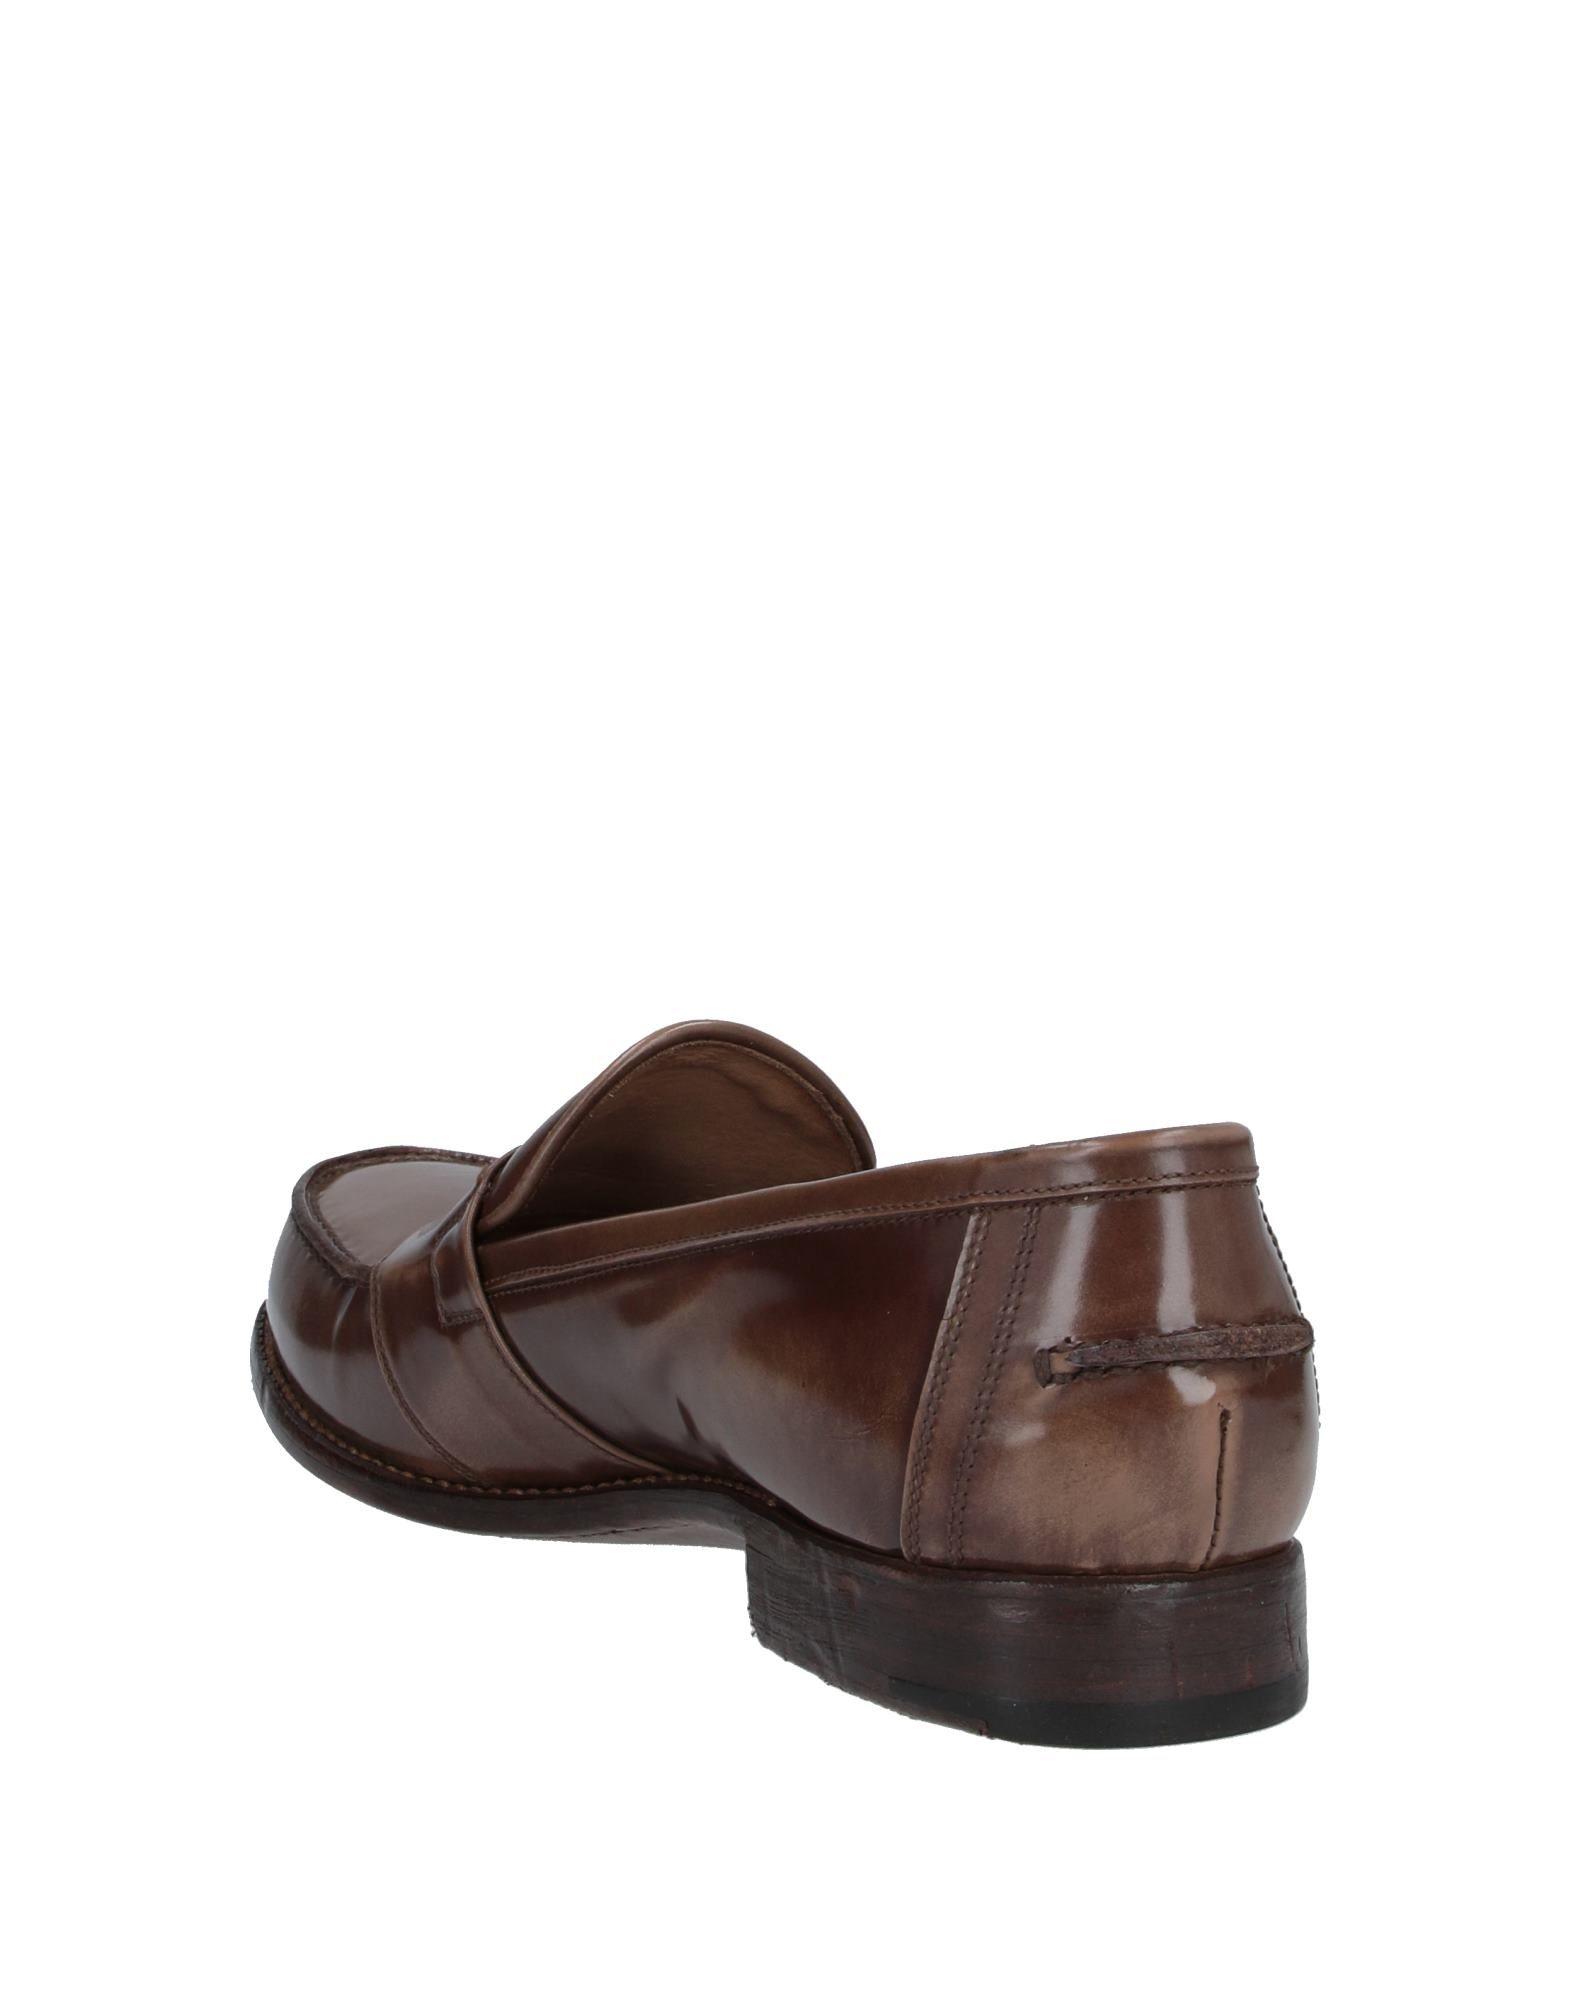 Alberto Fasciani Leather Loafer in Brown for Men - Lyst